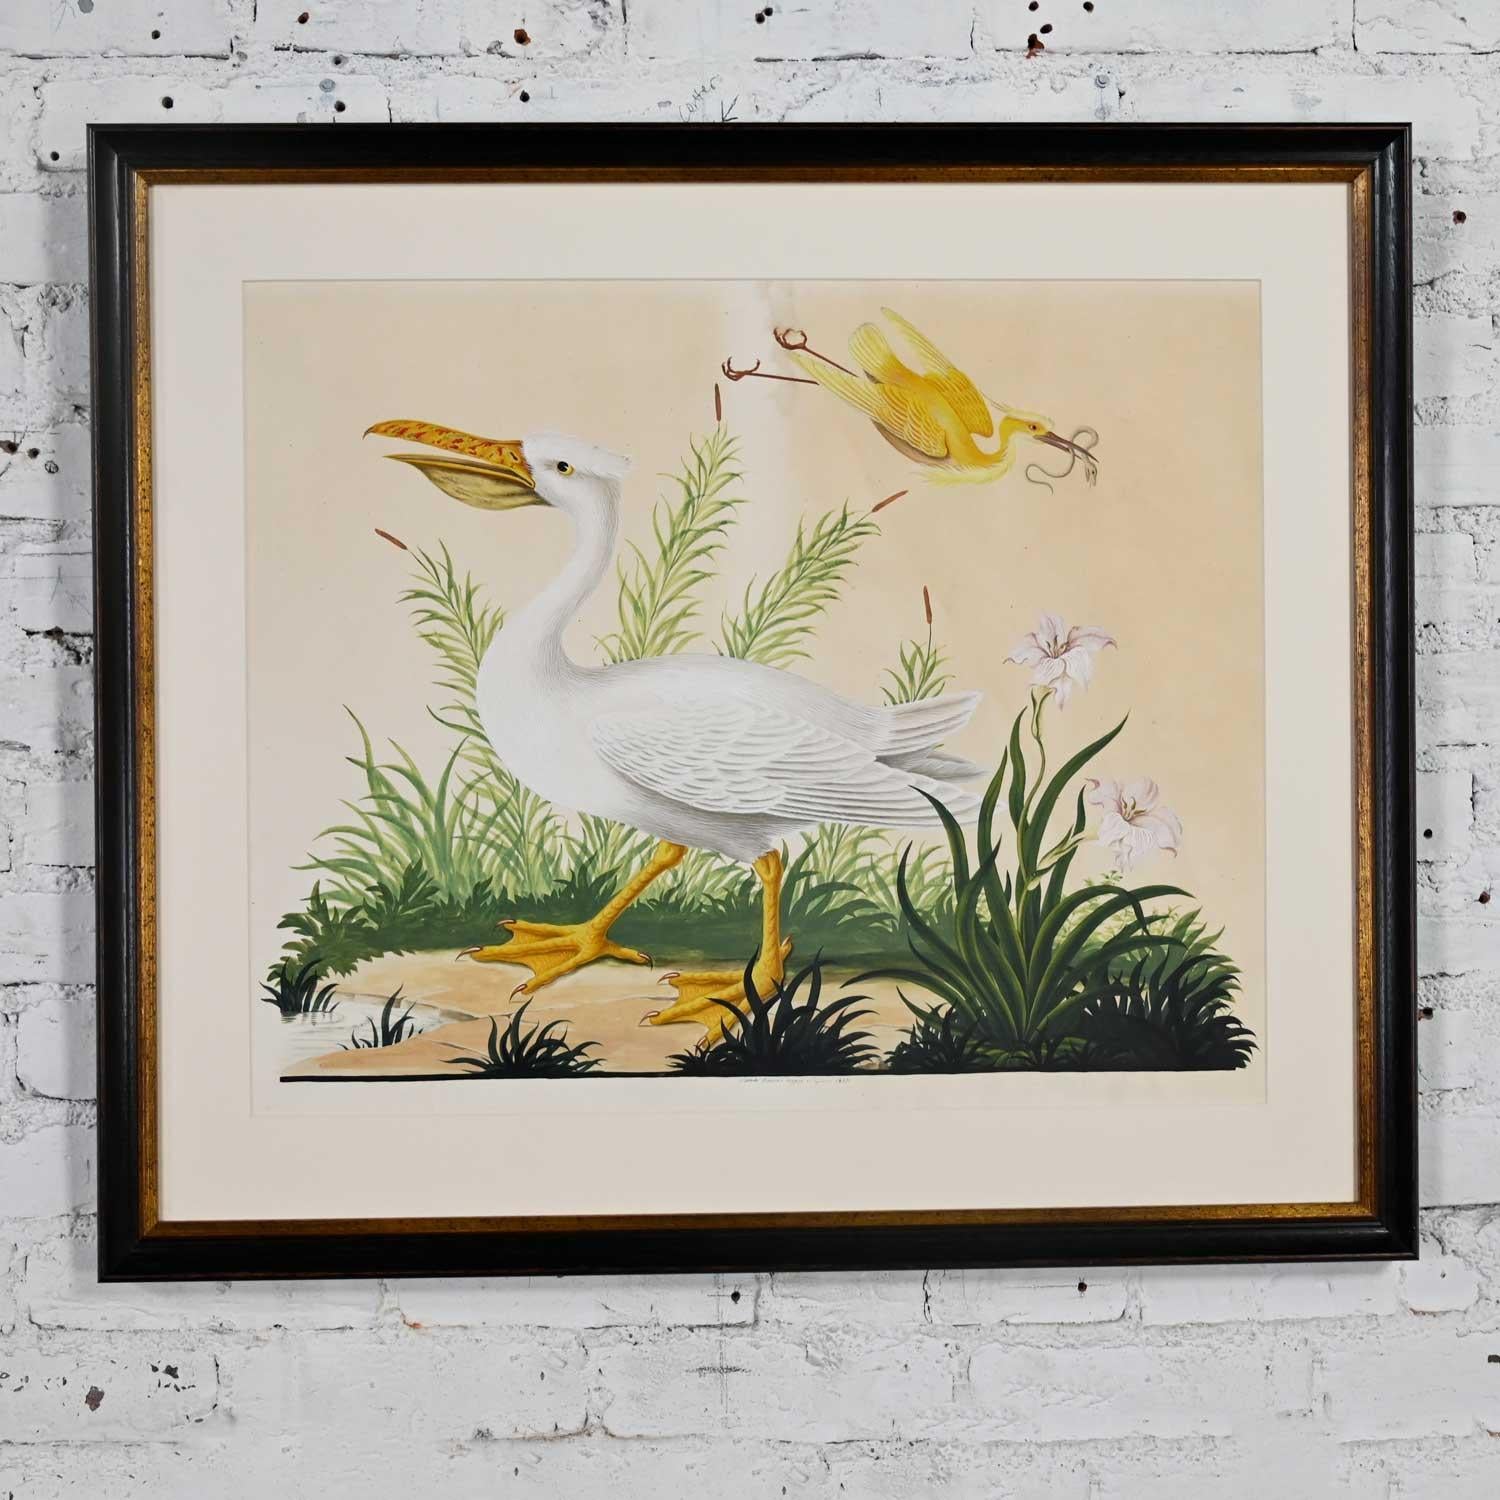 Fantastic vintage Vittorio Raineri watercolor painting of a Pelican & an Egret signed and dated 1837. Professionally framed in a black museum glass frame with UV protection and gold trim. Beautiful condition, keeping in mind that this is vintage and